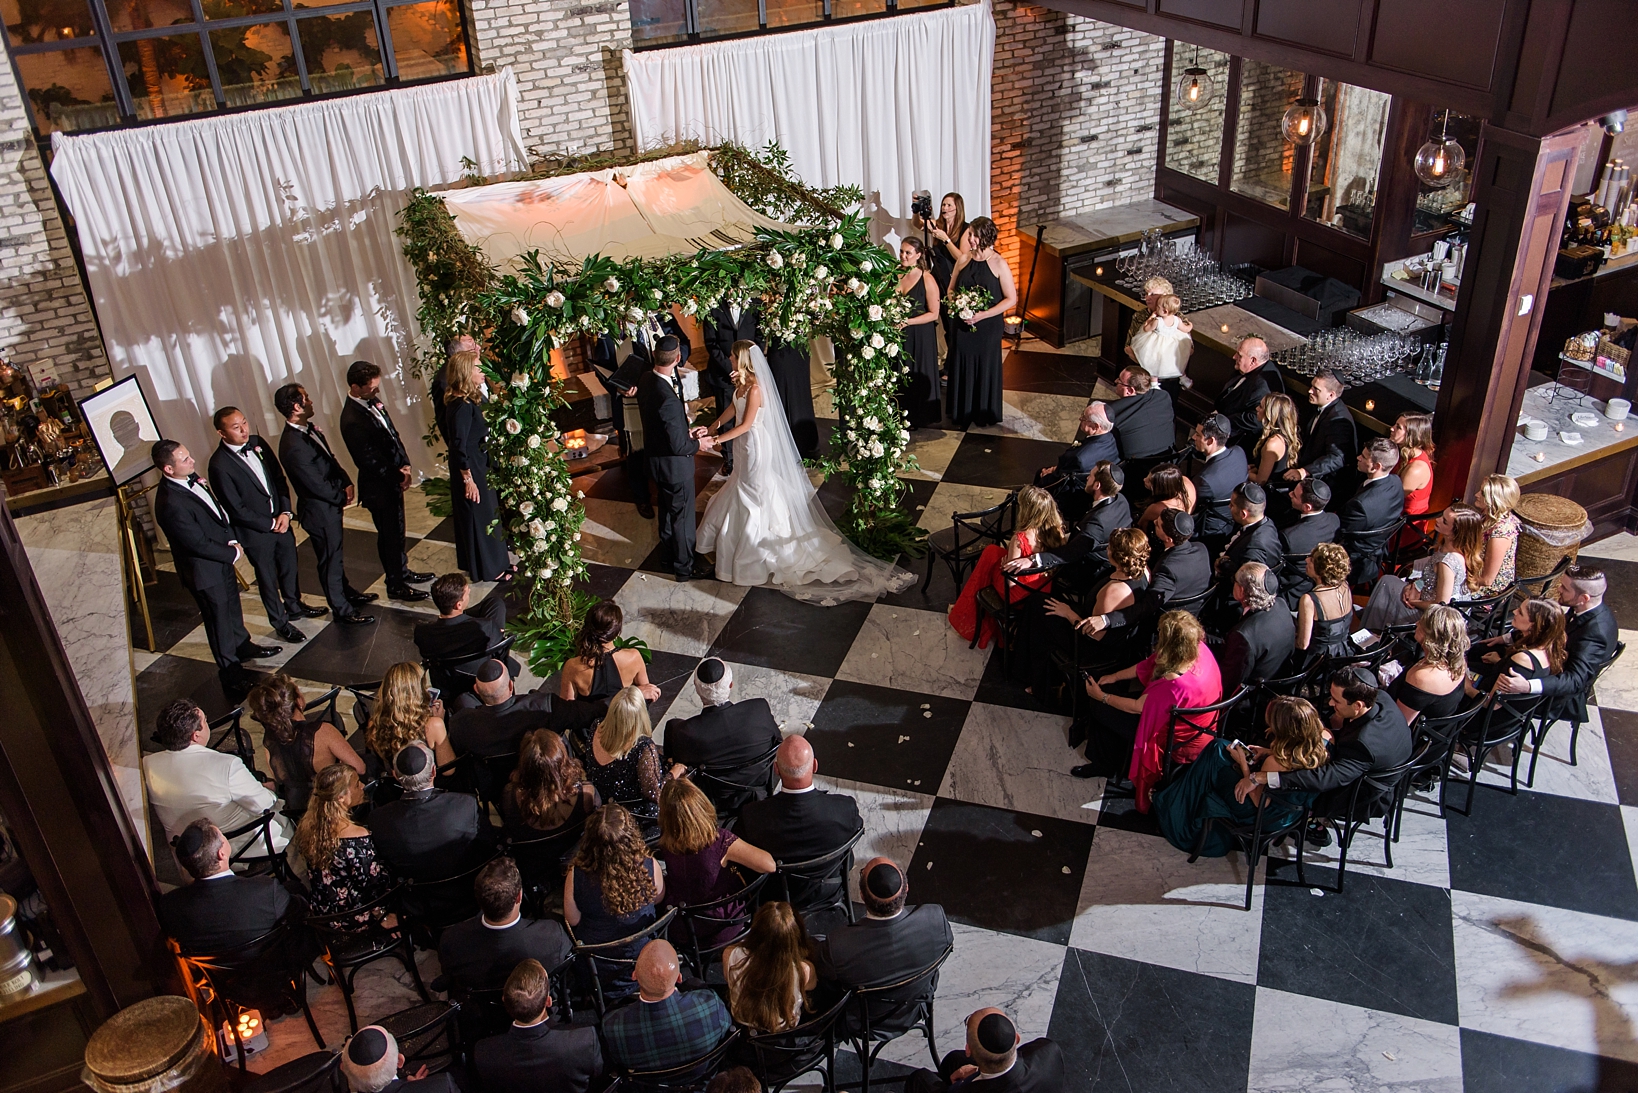 Bird's eye view of the ceremony and guests from a wedding at the Oxford Exchange in Tampa,FL